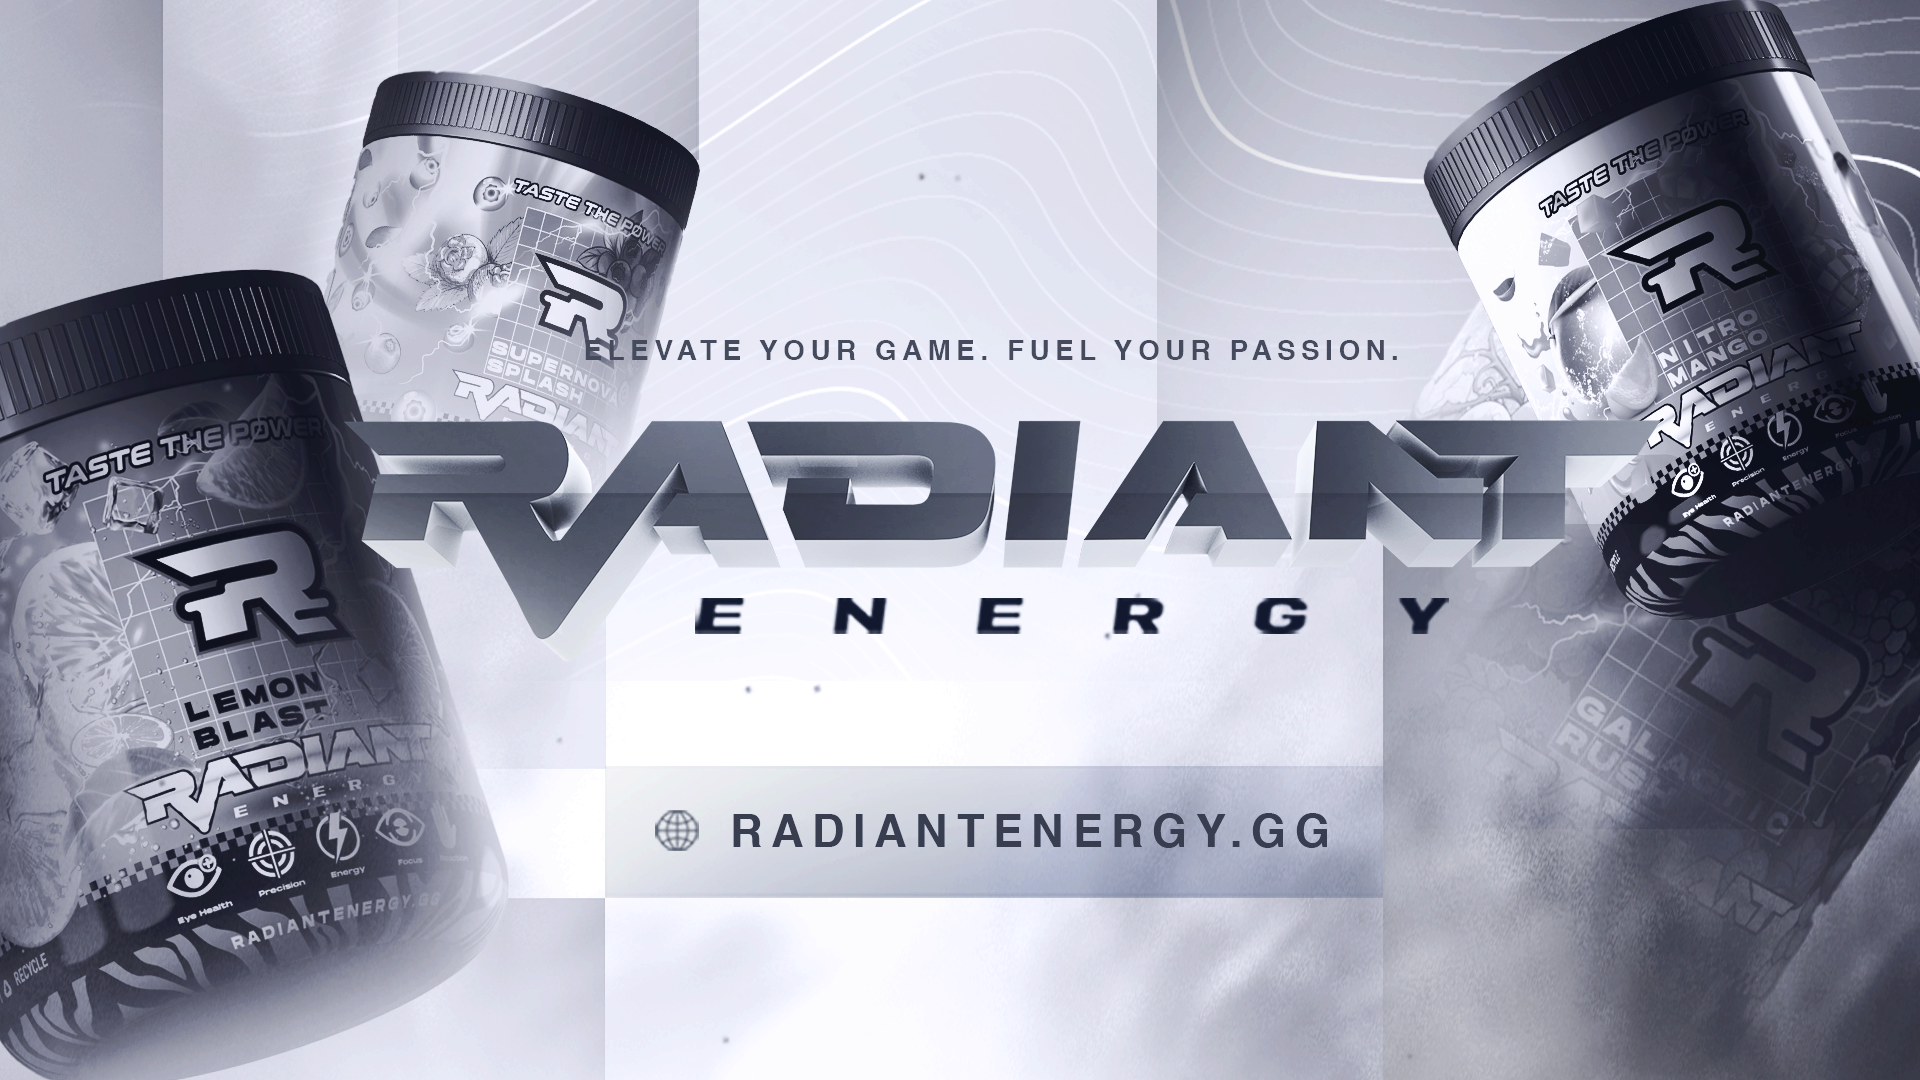 Welcome to the world of Radiant Energy – where passion, performance, and vitality converge into the ultimate energy drink for today's high achievers. Whether you're a gamer, creator, student, or athlete, Radiant Energy is designed to fuel